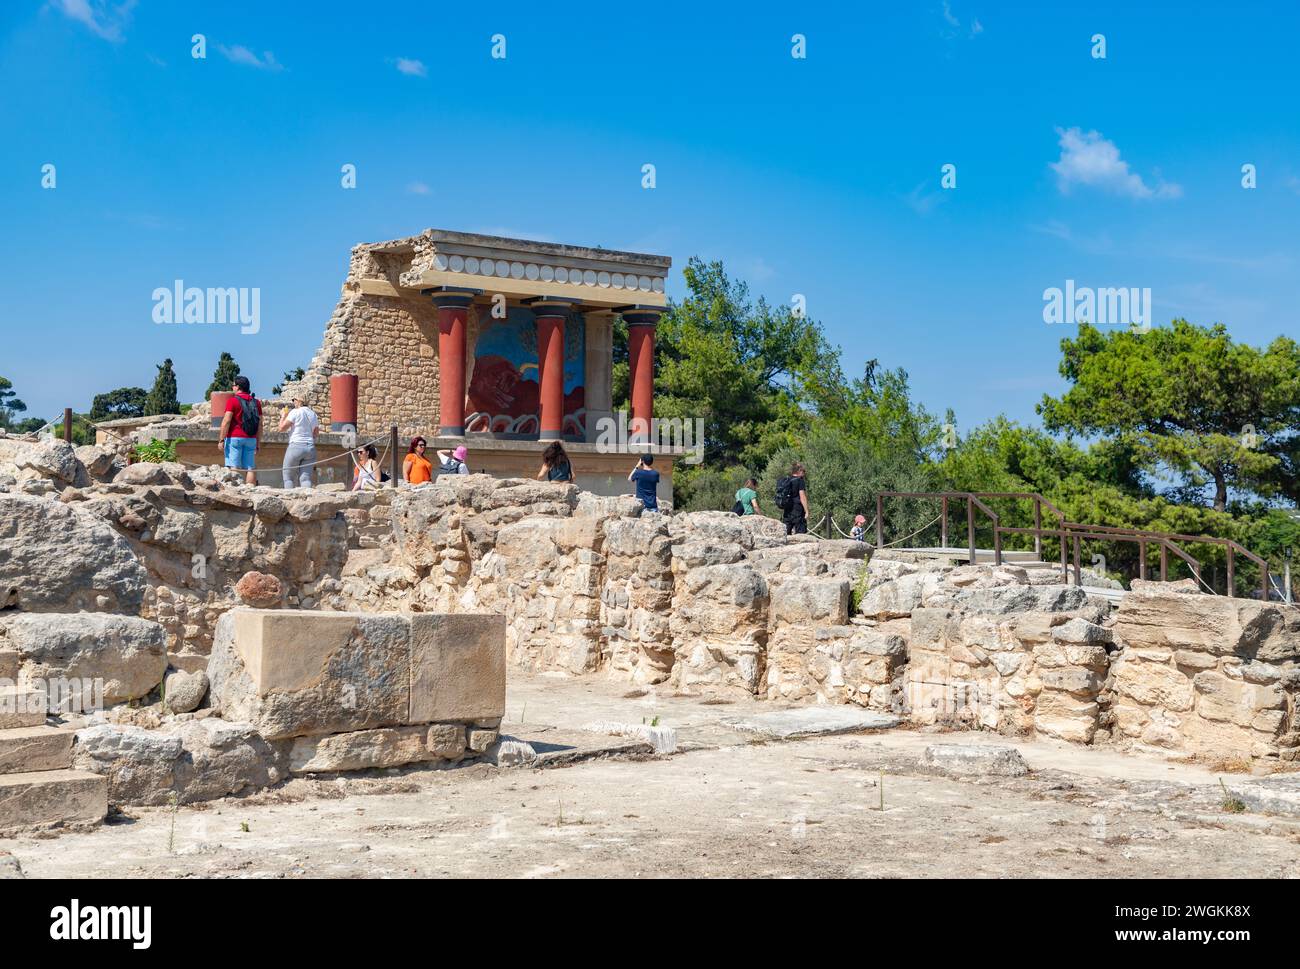 A picture of the North Entrance and the Bull Fresco at the Knossos Palace. Stock Photo